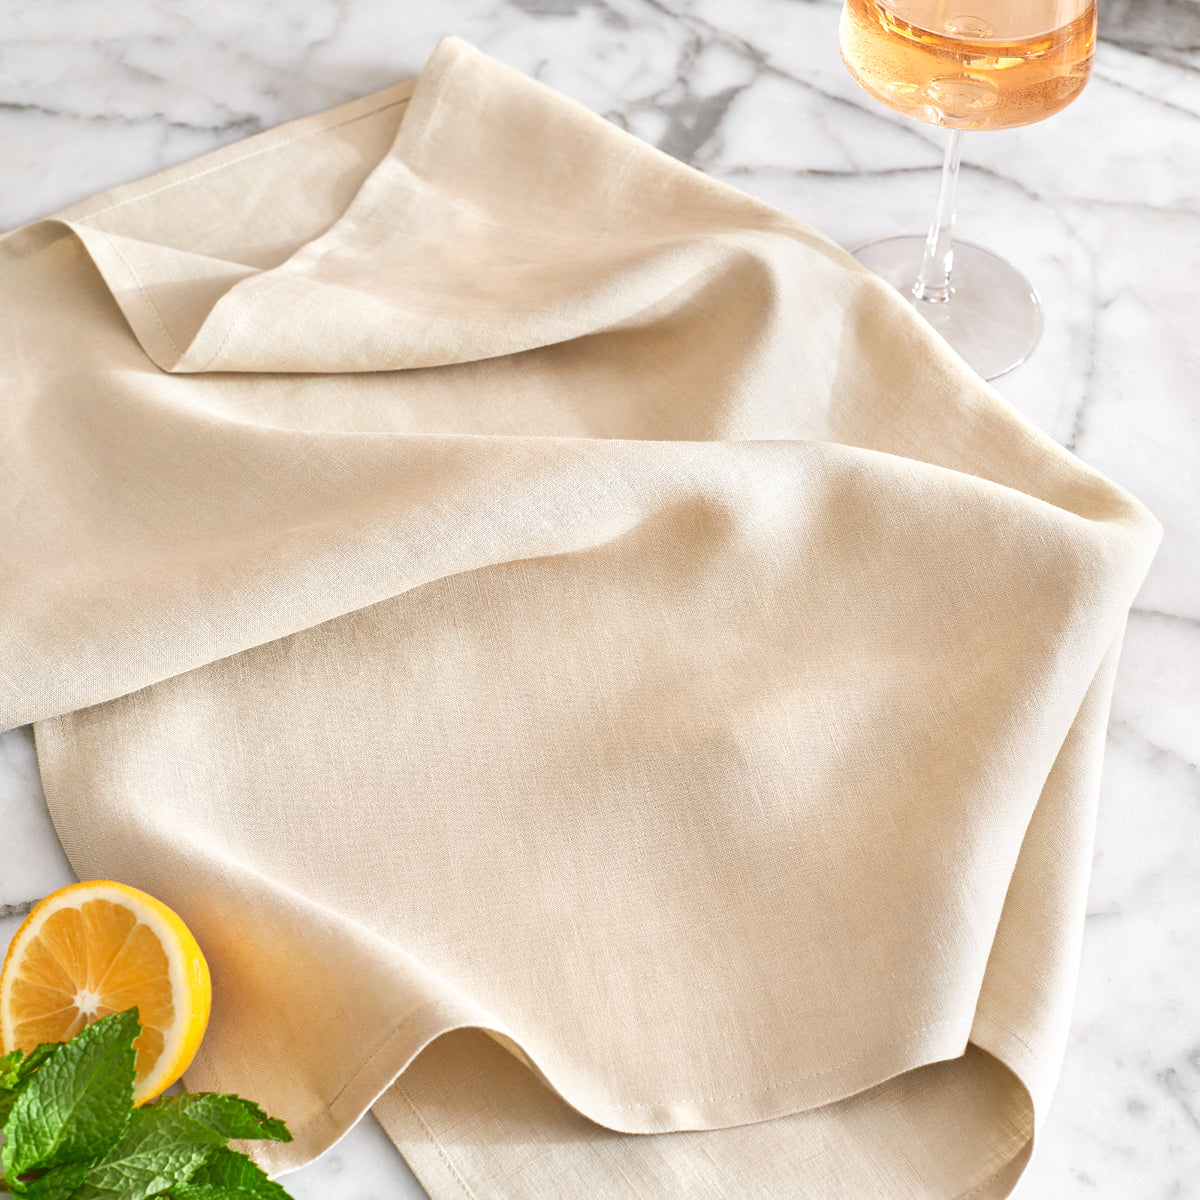 Under The Canopy Linen Tea Towel - Natural Natural / One Towel